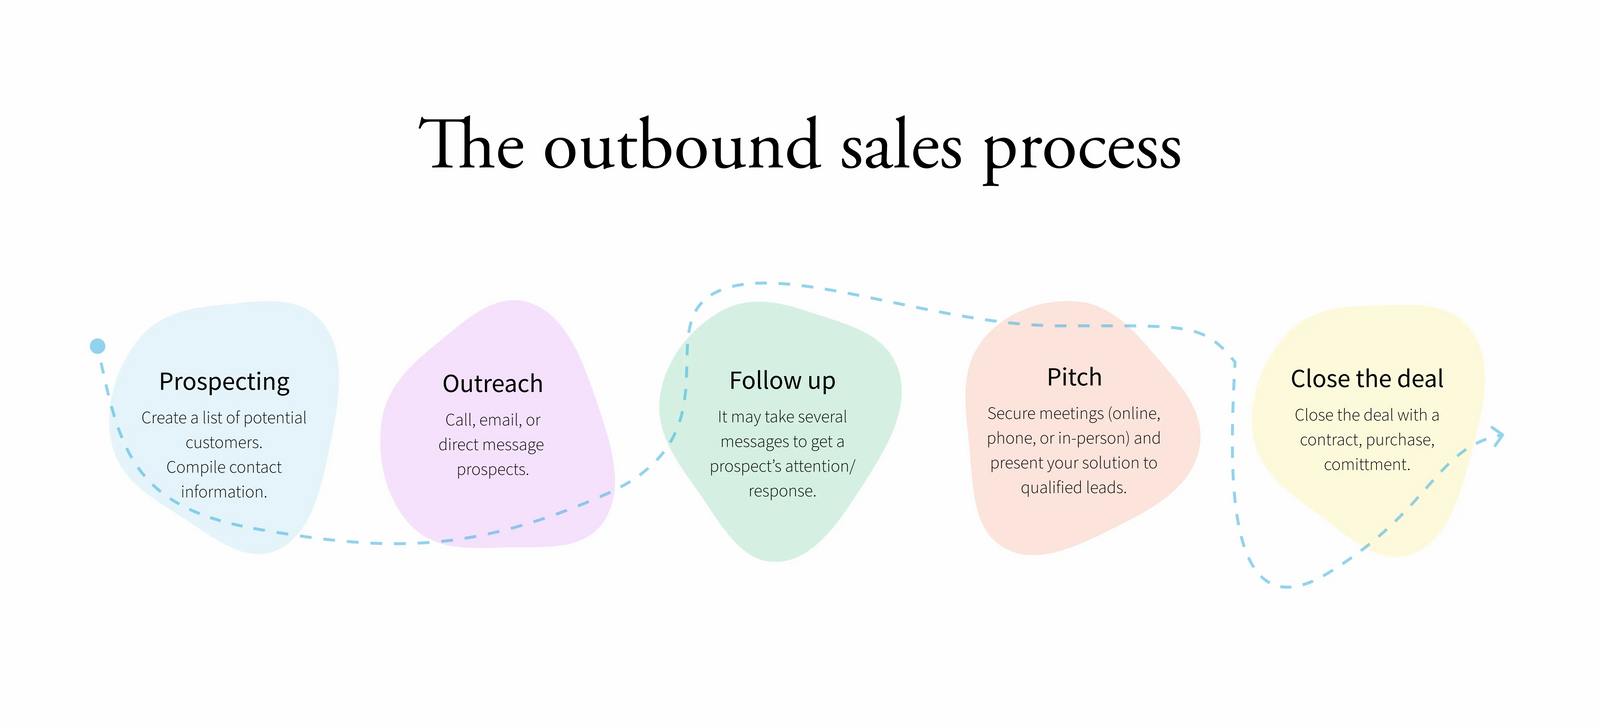 the outbound sales process for small businesses illustration showing each step prospecting, pitching, closing